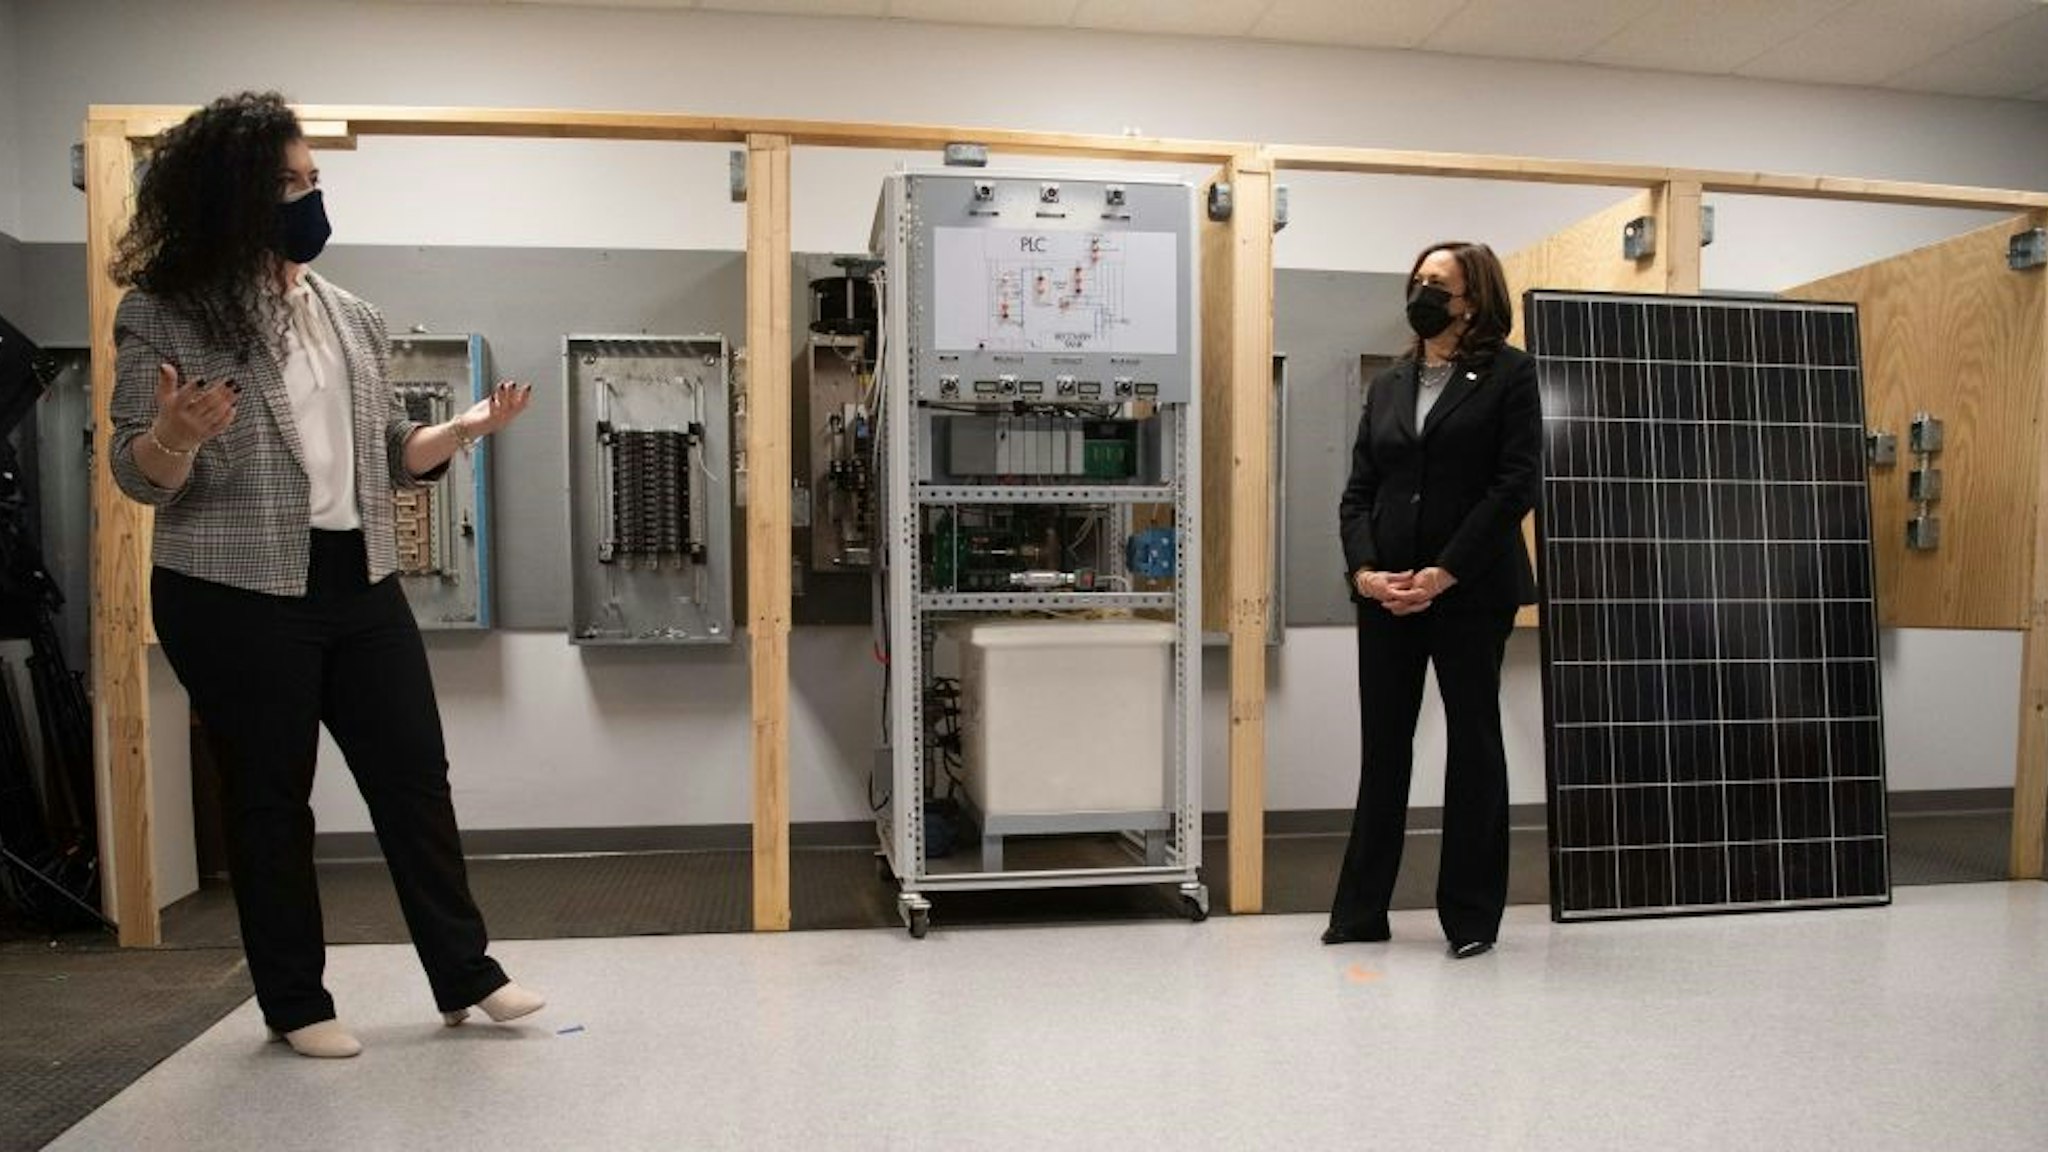 US Vice President Kamala Harris speaks with Haley Kamberalis, IBEW apprentice, as she tours the IBEW Training Center in Concord, New Hampshire, April 23, 2021 as she travels to the state to promote the administration's economic plans. (Photo by SAUL LOEB / AFP) (Photo by